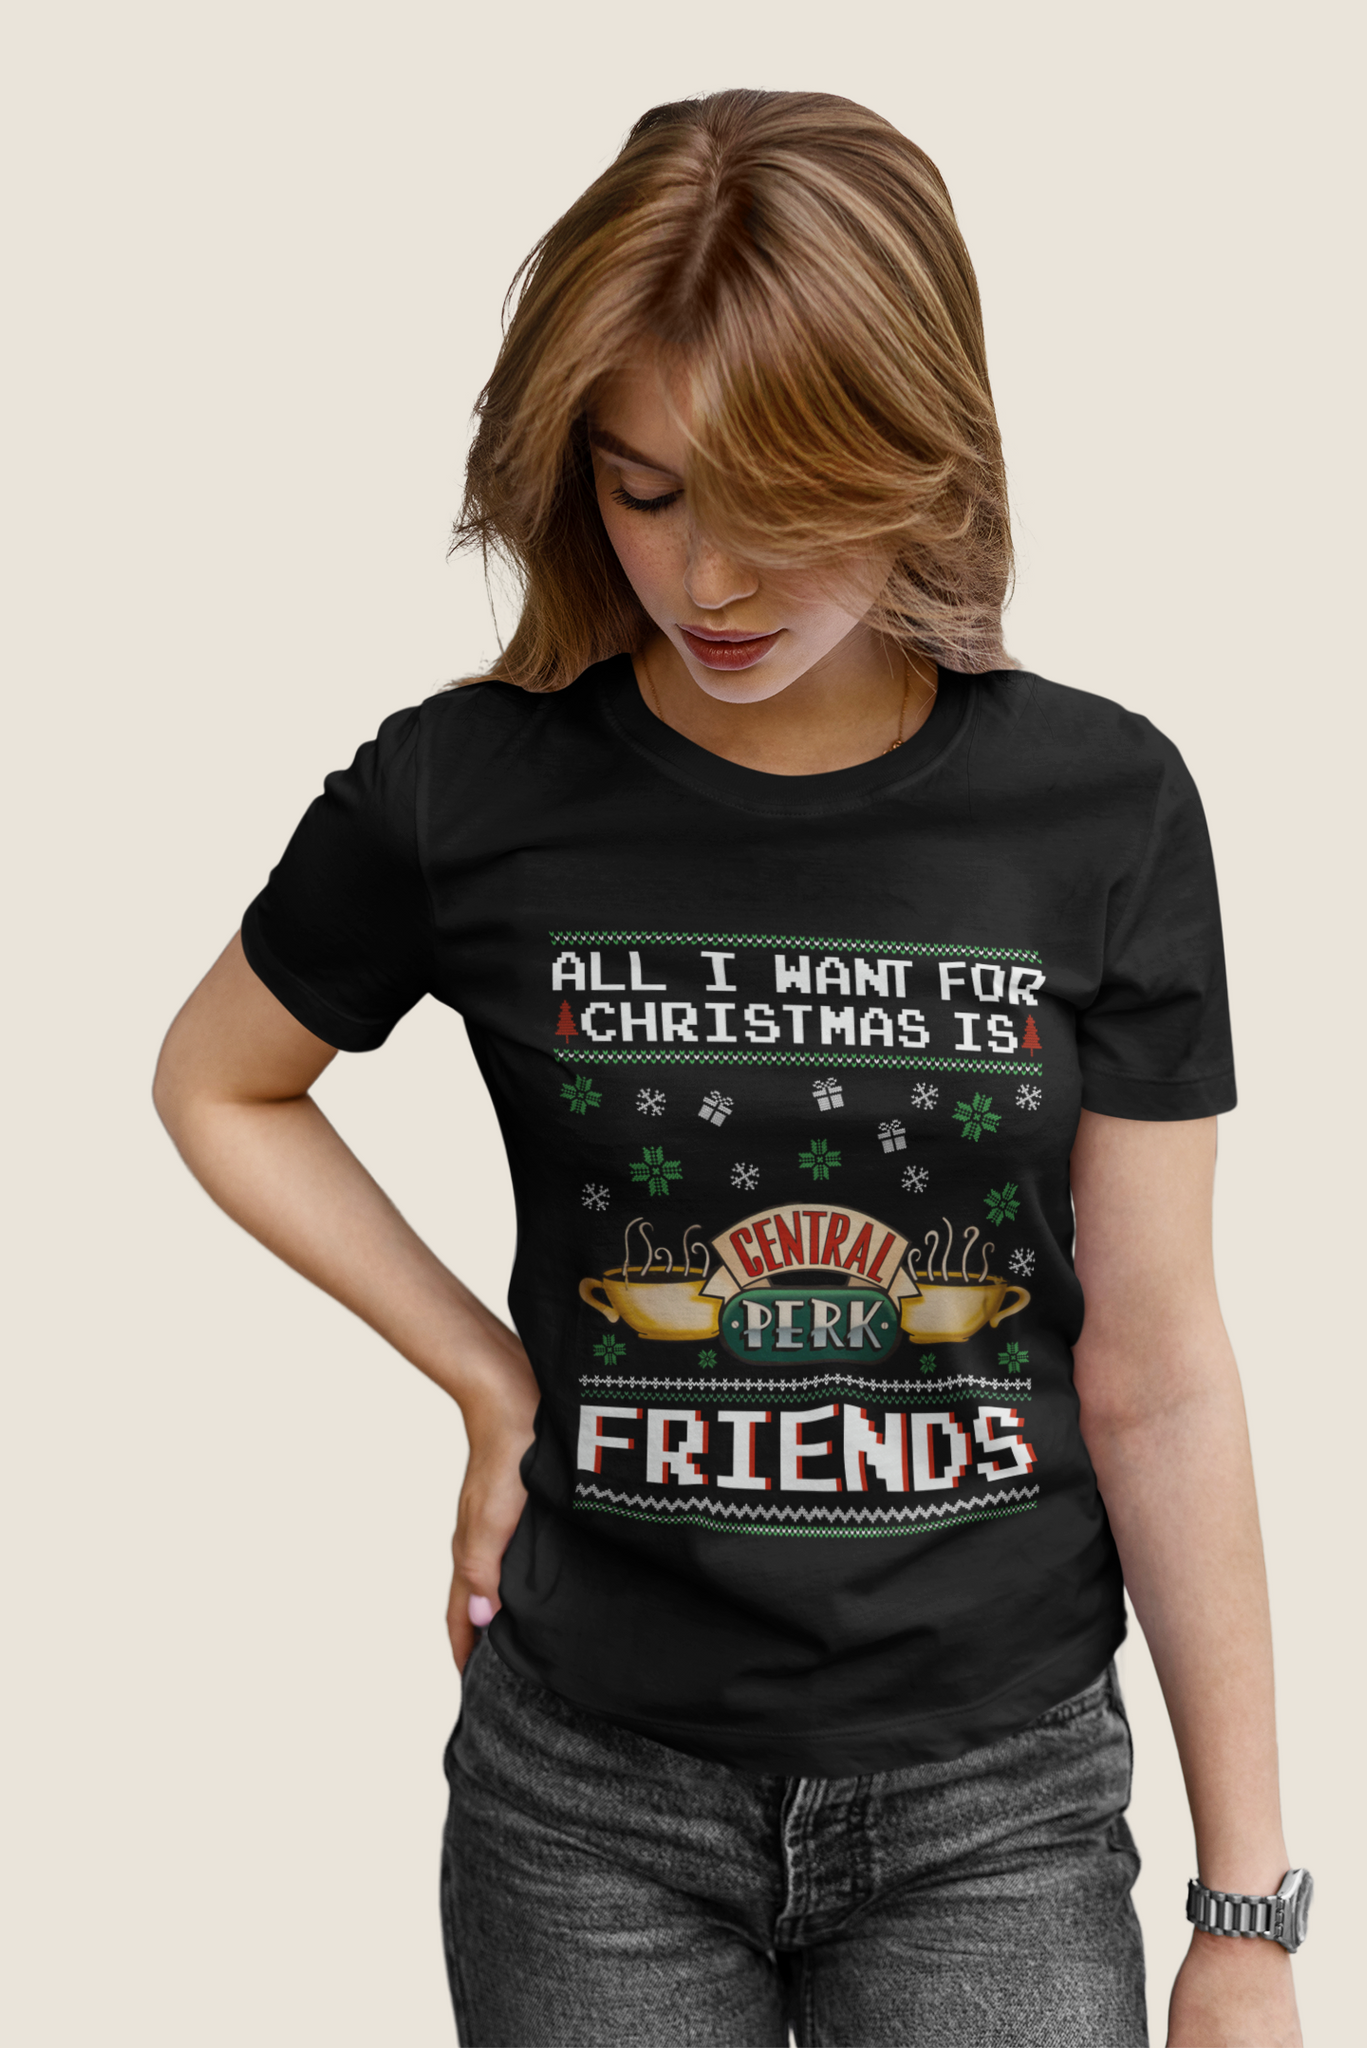 Friends TV Show Ugly Sweater T Shirt, Coffee Central Perk T Shirt, All I Want For Christmas Is Friends Tshirt, Christmas Gifts